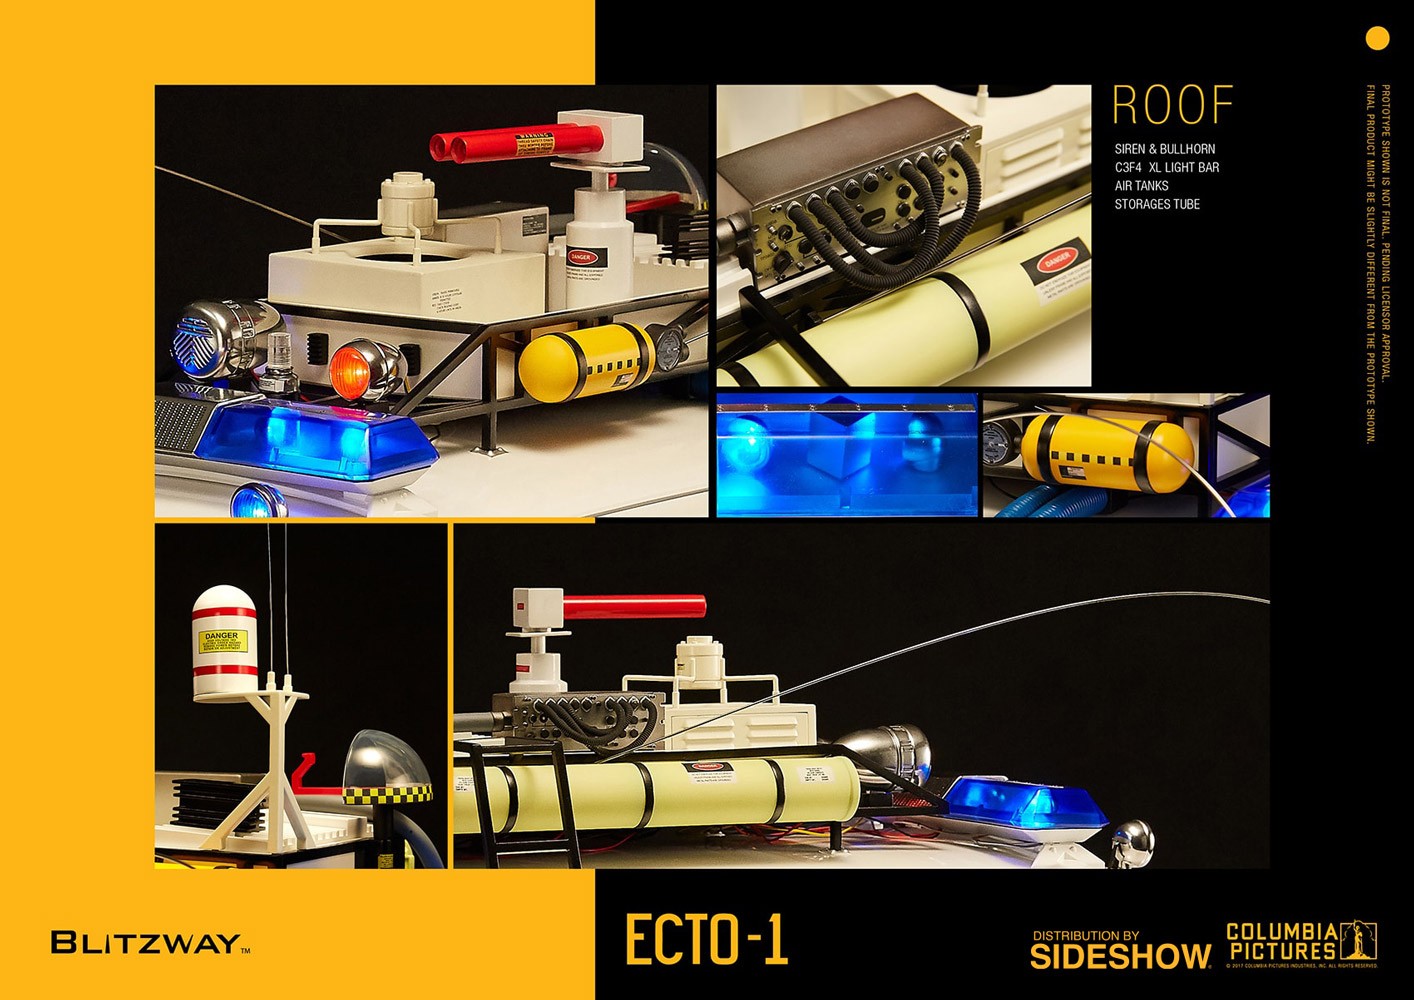 ECTO-1 Ghostbusters 1984